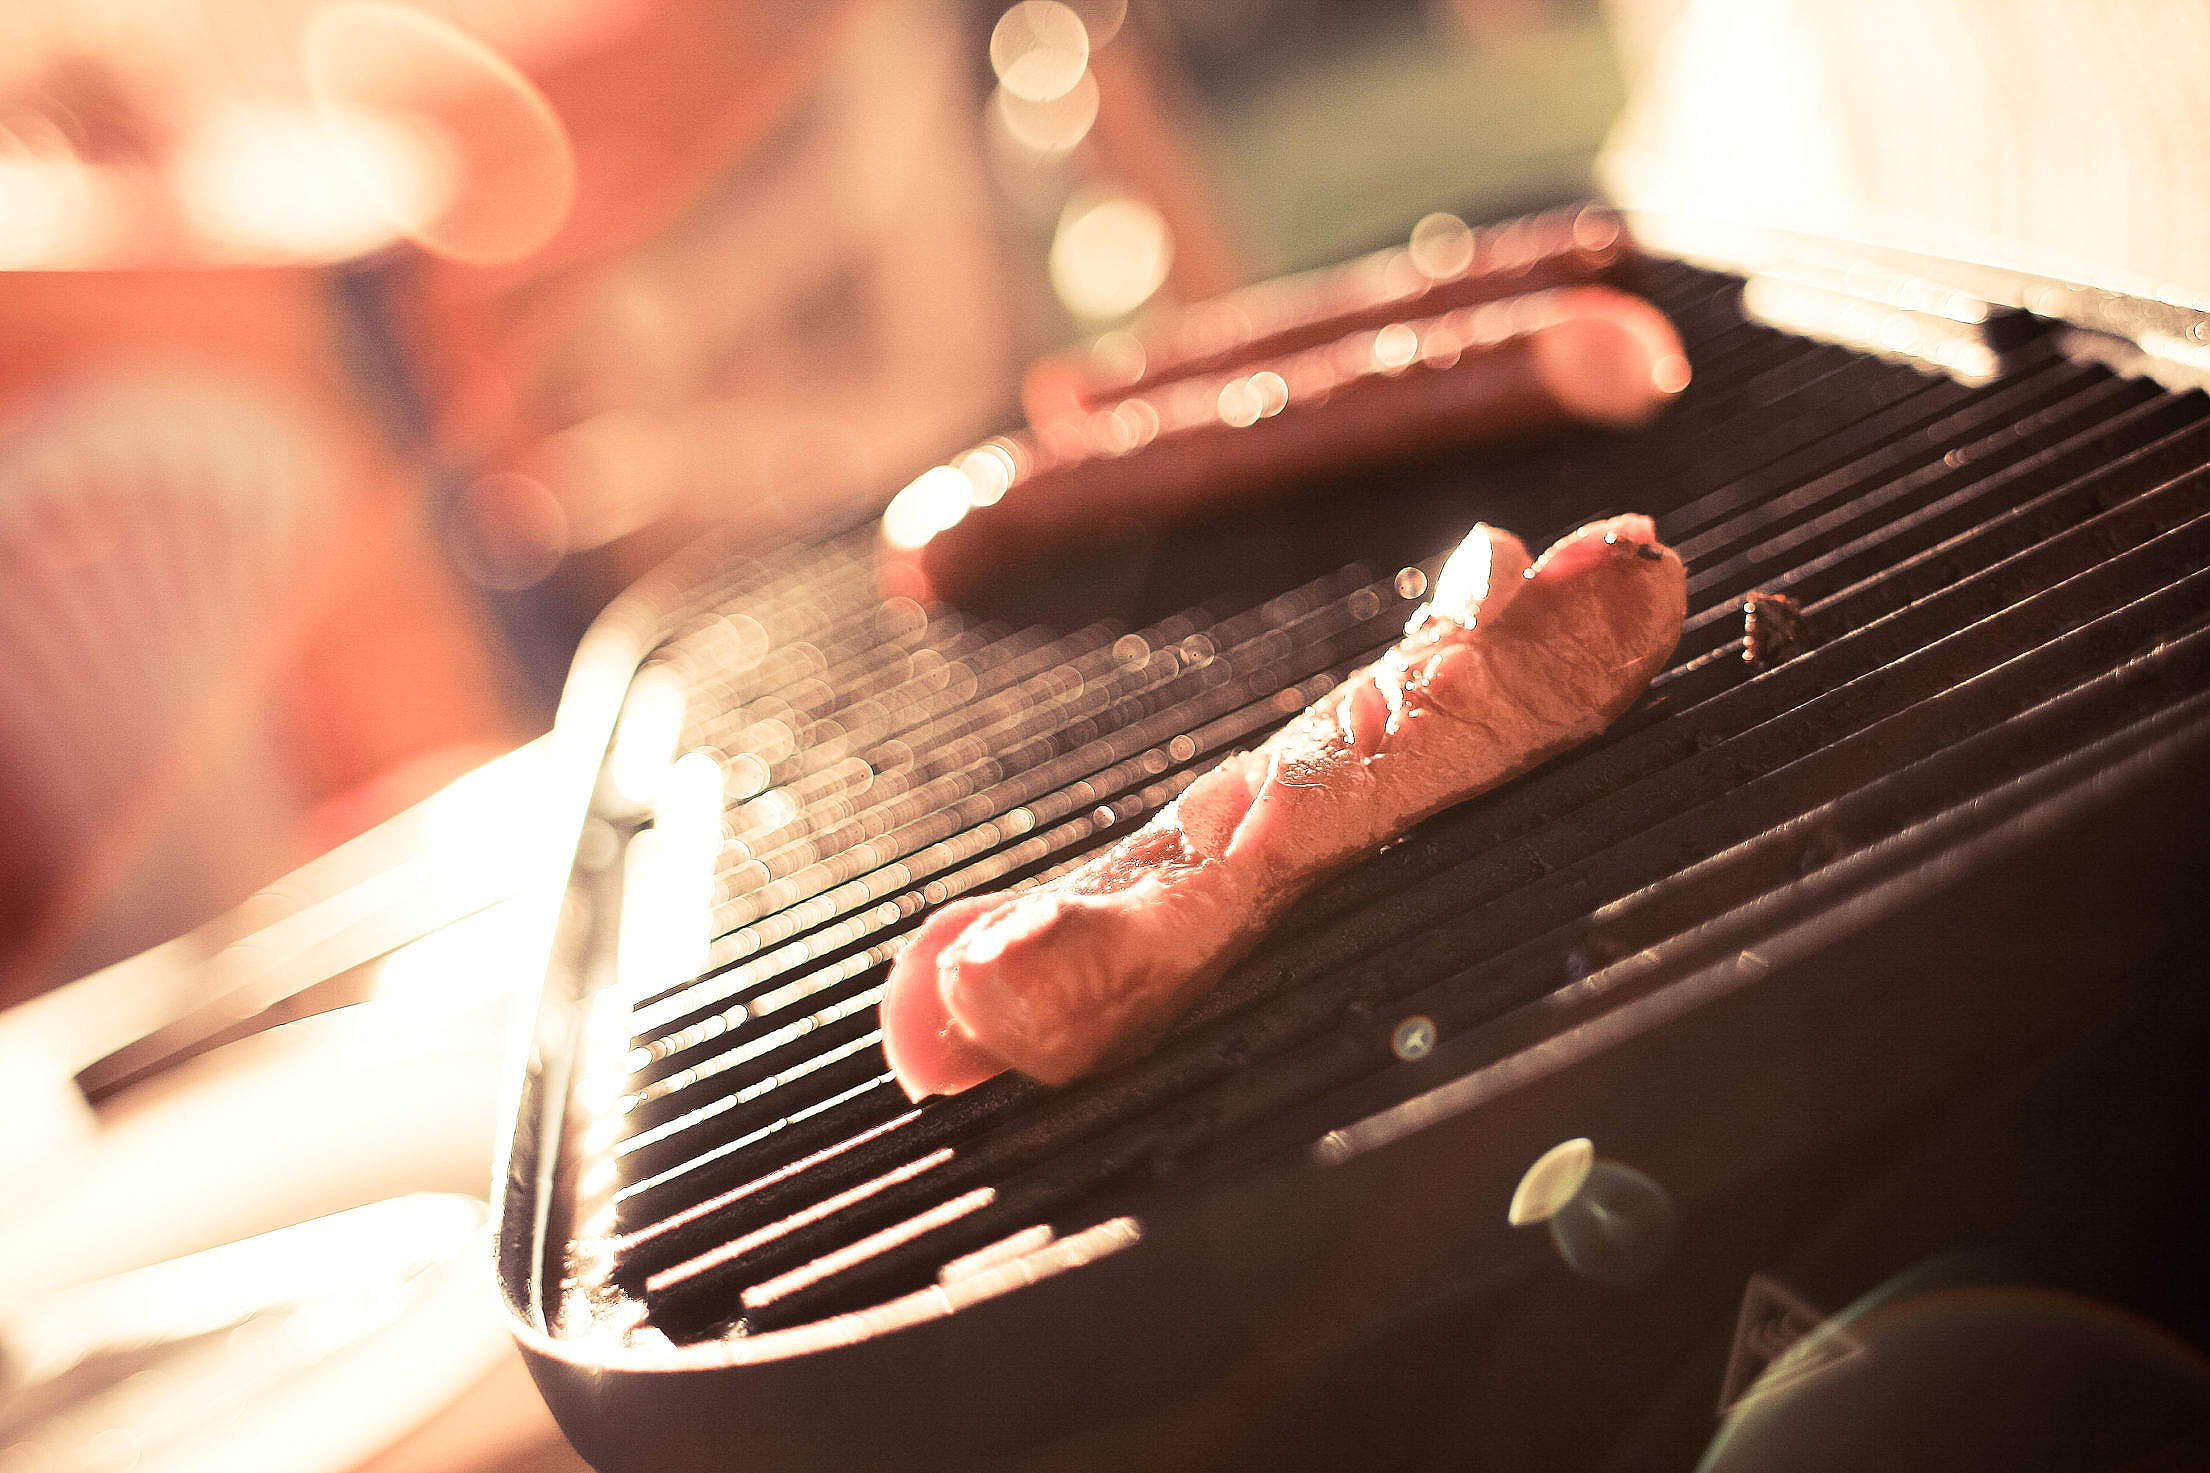 Sausages on a Grill Free Stock Photo